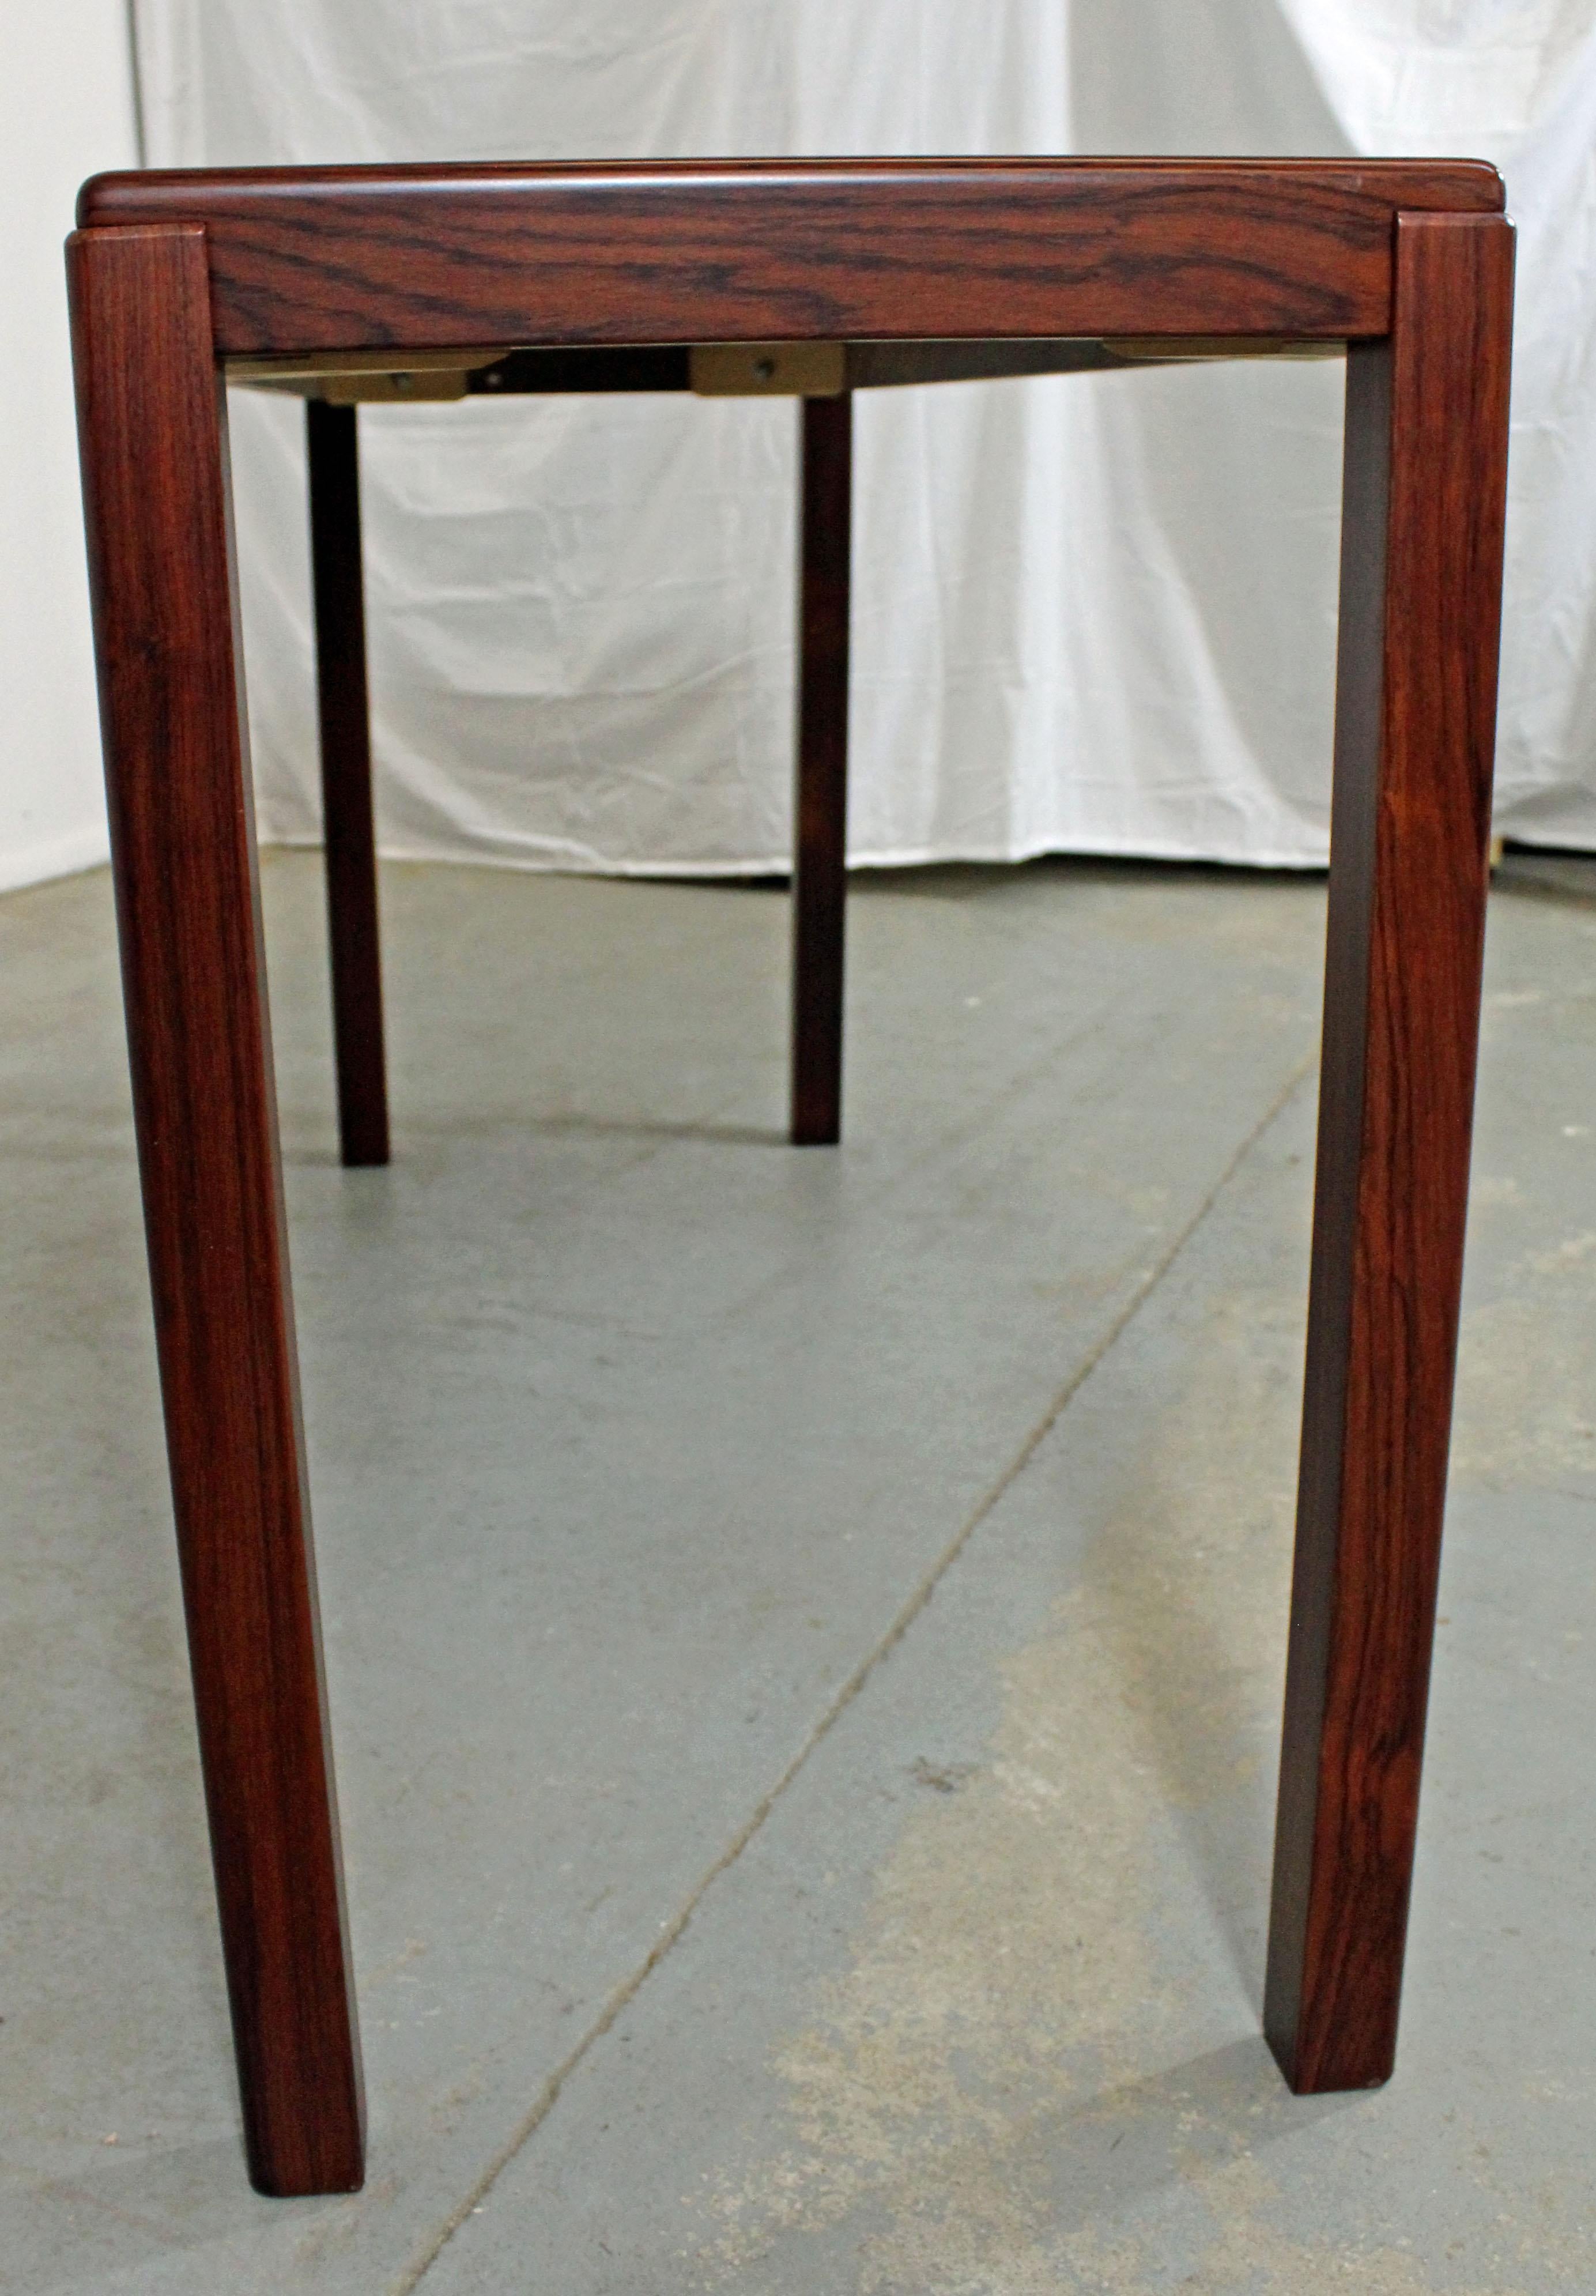 20th Century Midcentury Danish Modern Vejle Stole Parquet Top Rosewood Console Table